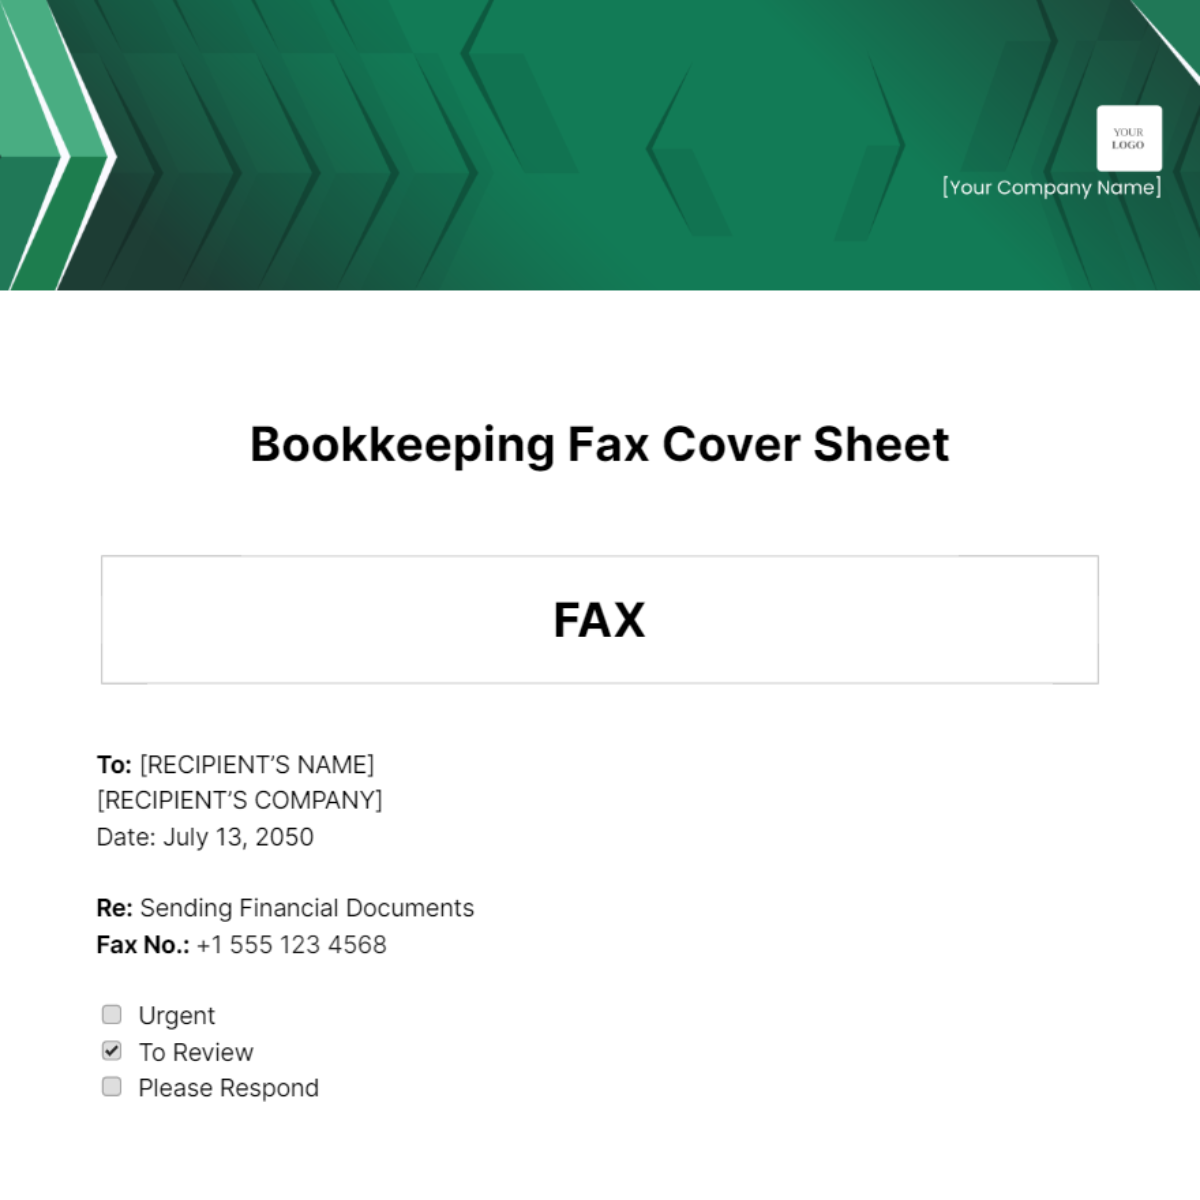 Bookkeeping Fax Cover Sheet